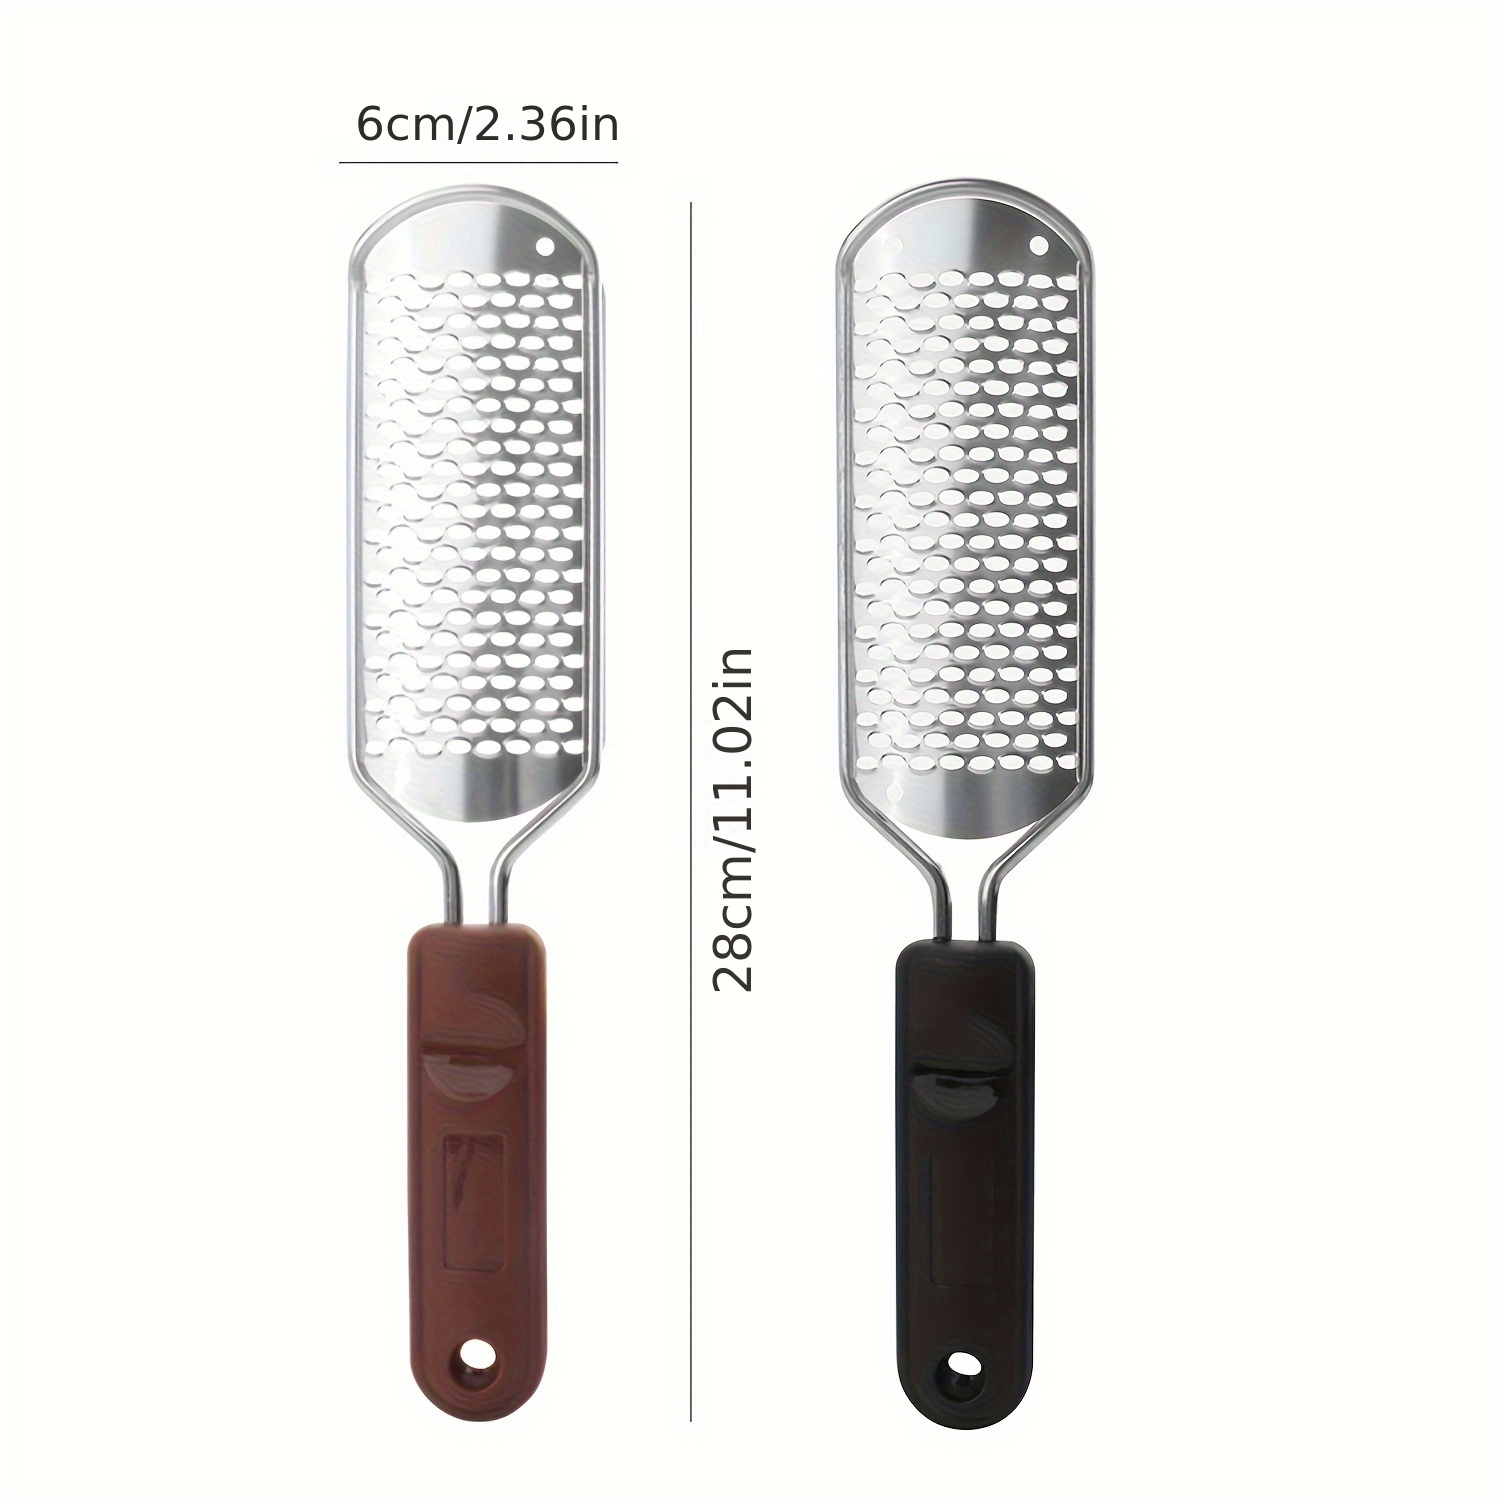 Foot Rasp,3PCS Feet Scrubber Dead Skin,Callus Remover for Feet,Pedicure  Tools & Foot Scrubber Can be Used on both wet and dry feet, Surgical grade  stainless steel file 